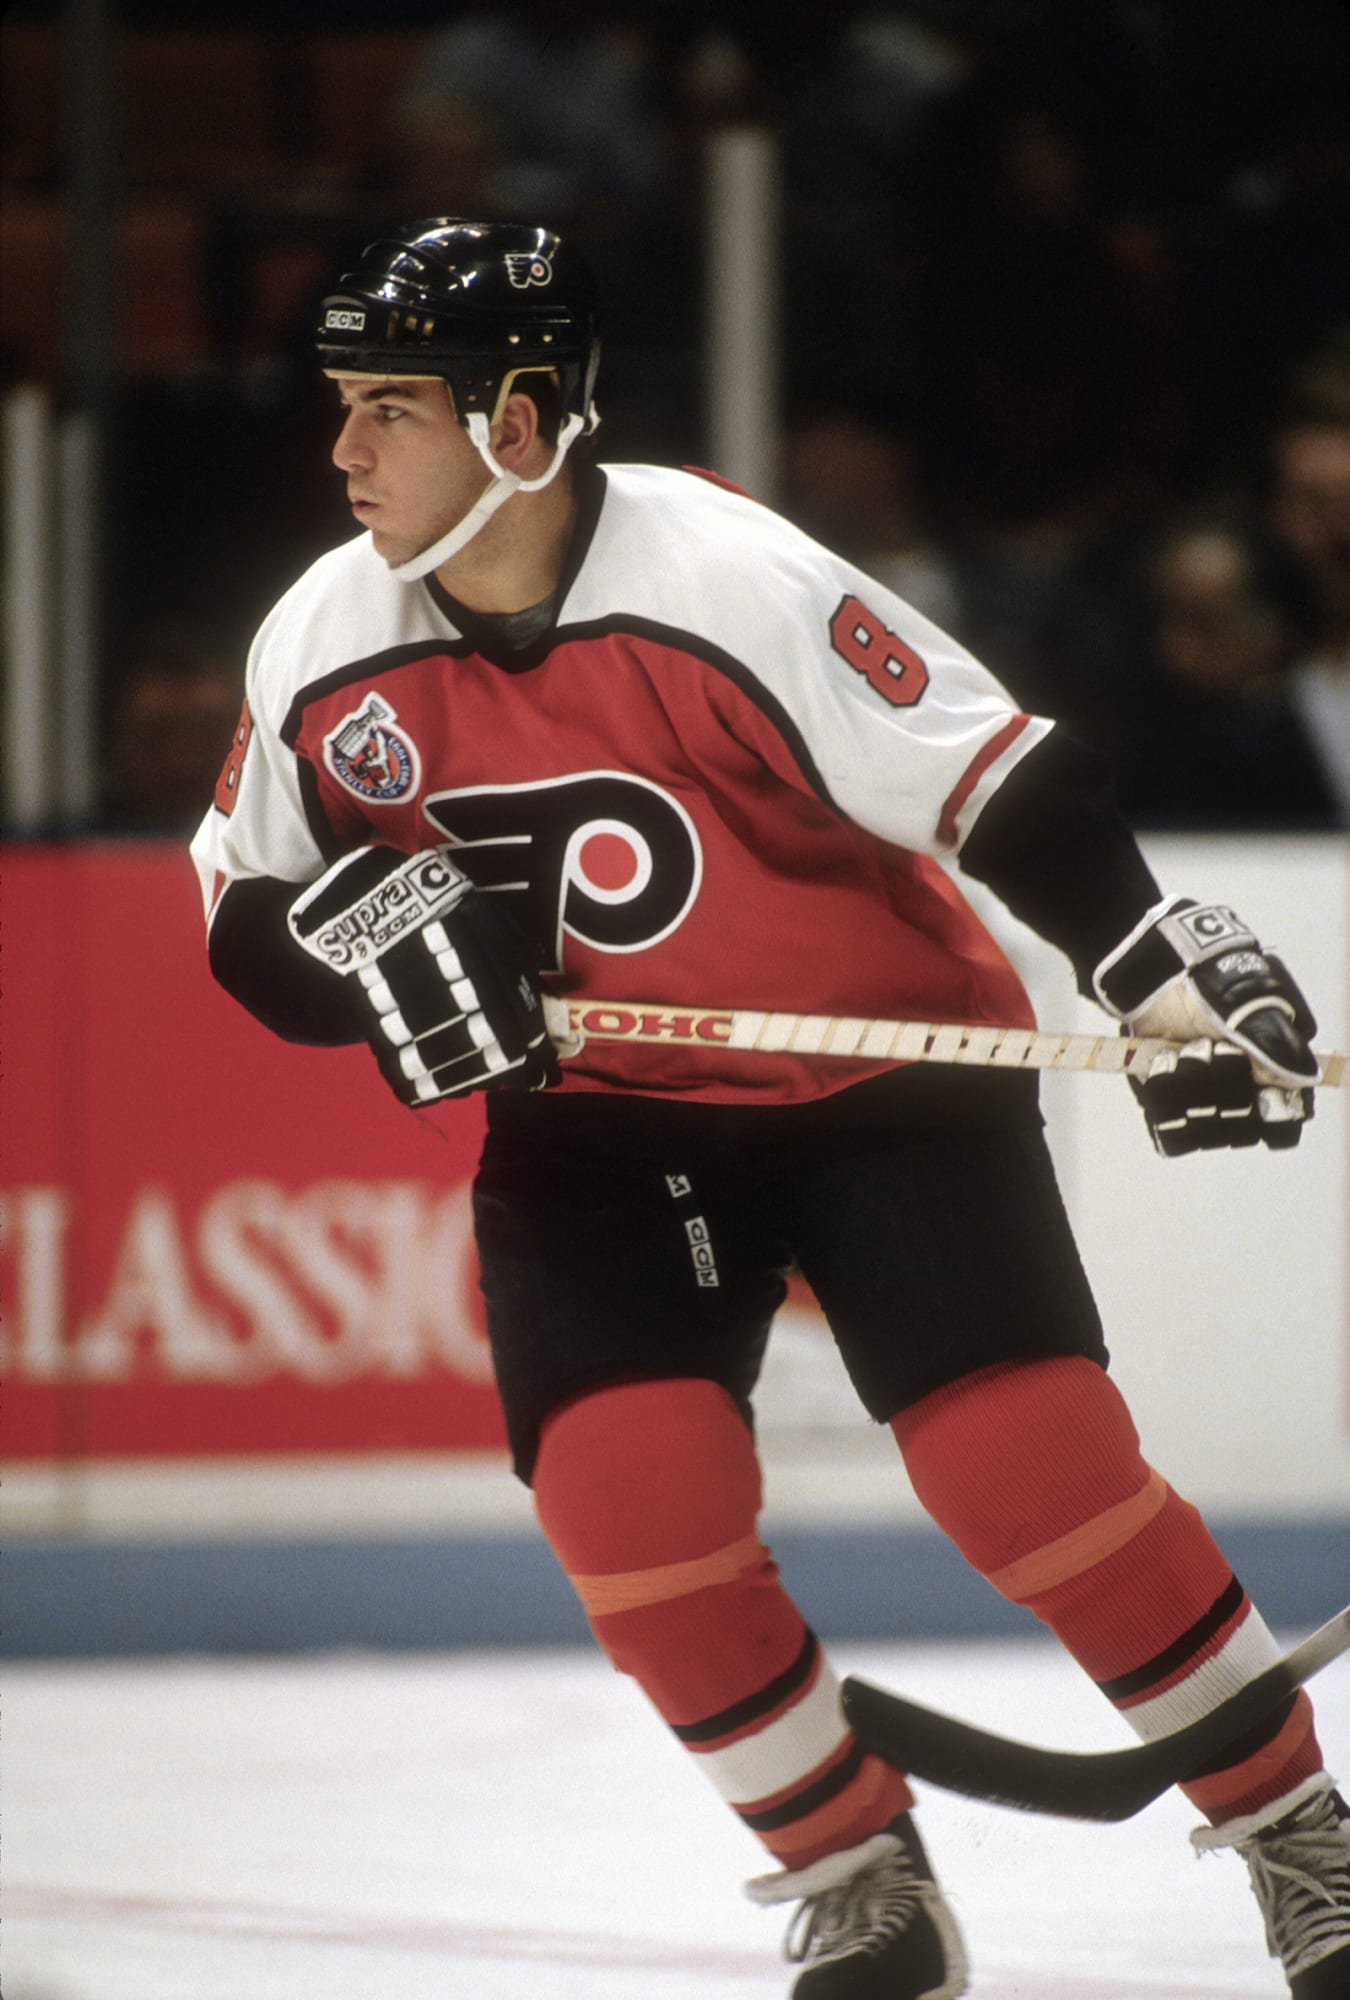 Fittingly together, Rick Tocchet, Paul Holmgren to be inducted